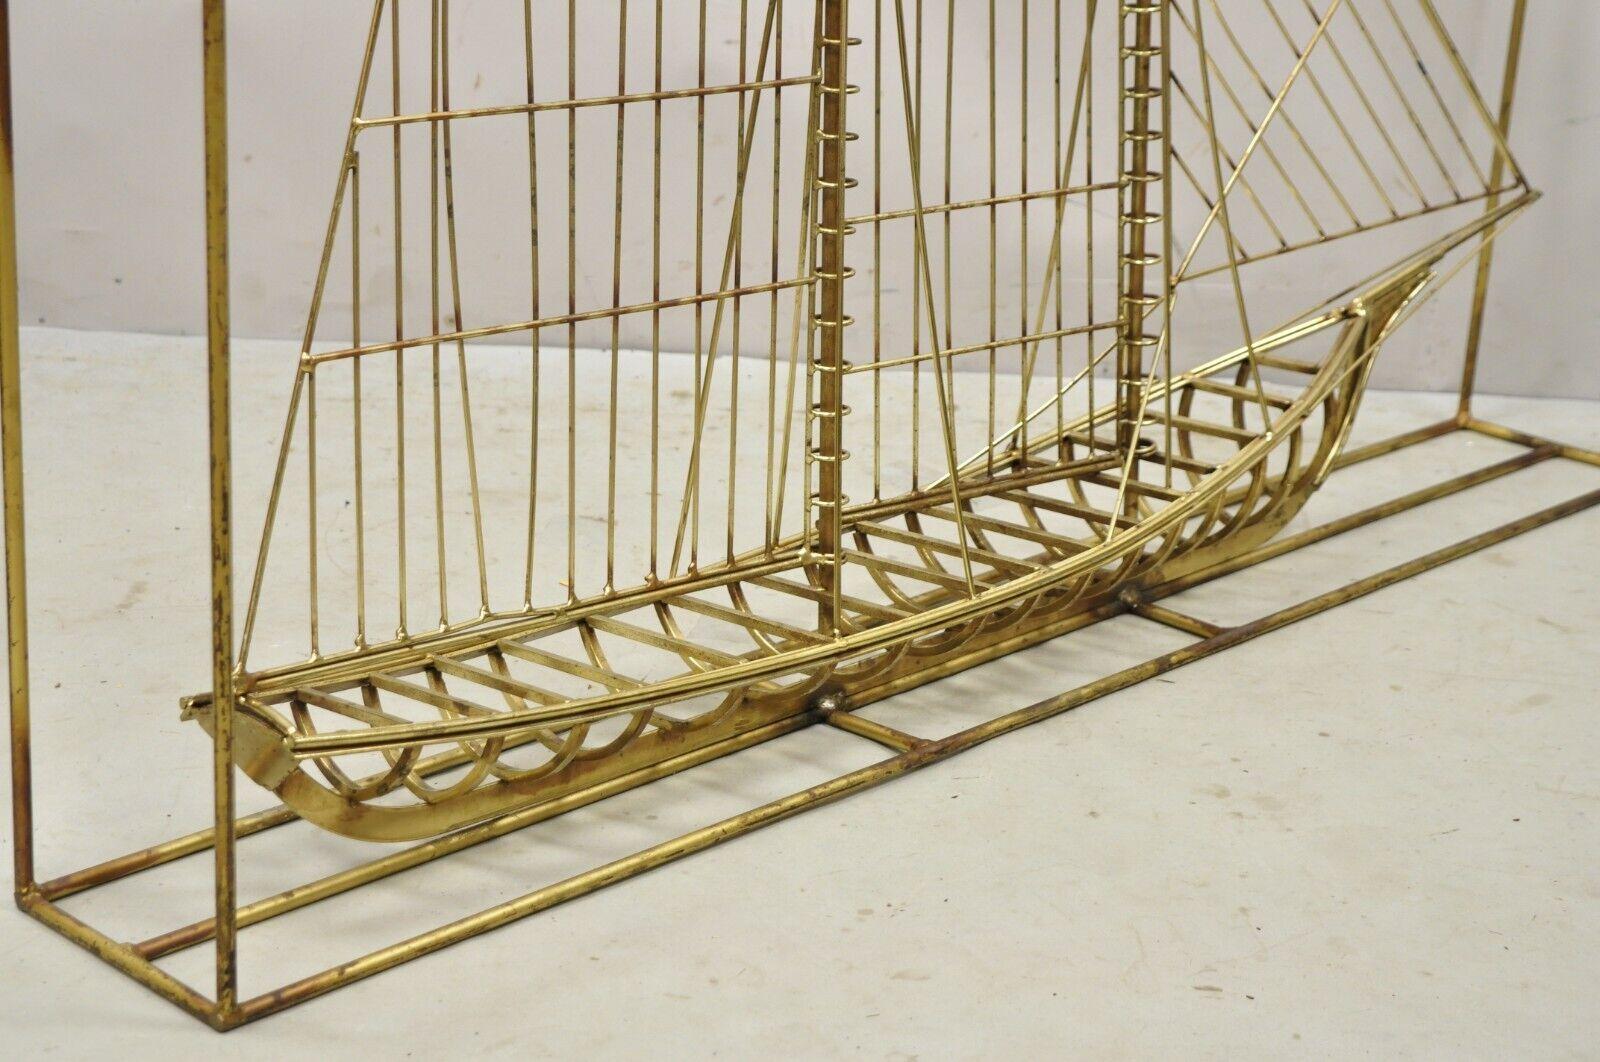 Large Curtis Jere Metal Clipper Ship 3d Sailboat Mid-Century Modern Sculpture For Sale 1